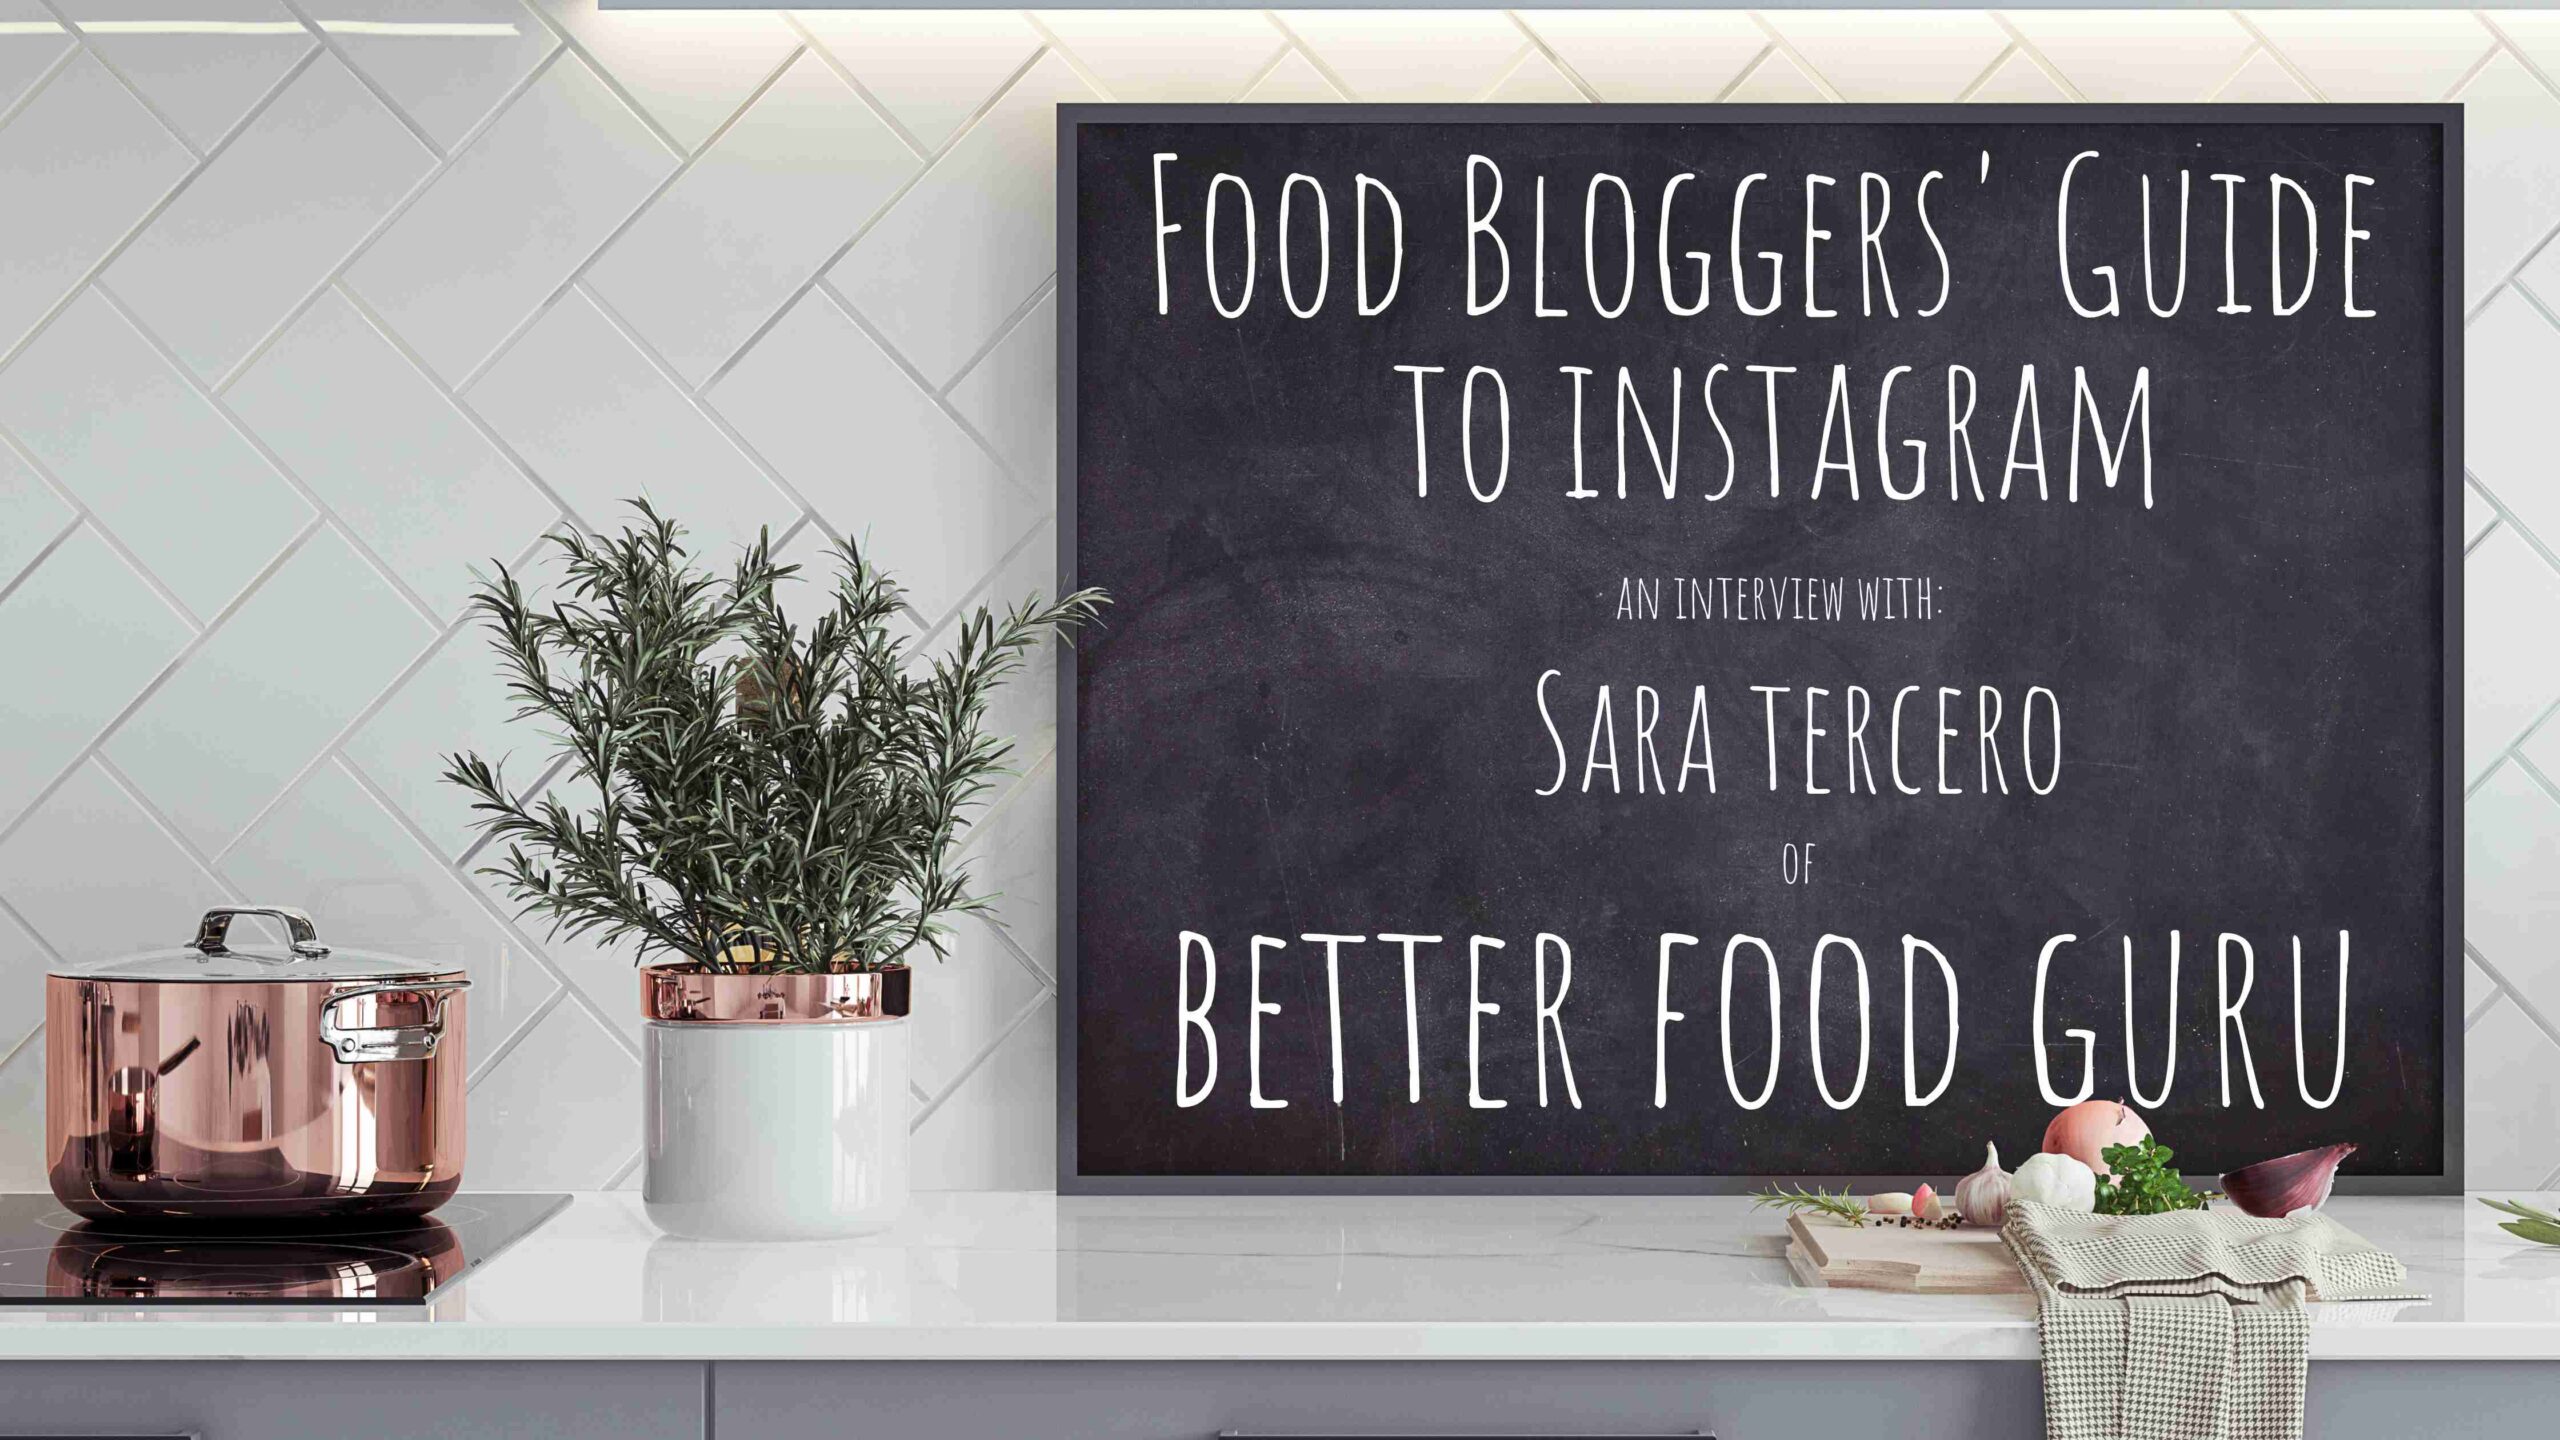 food bloggers’ guide to Instagram text on a board in a kitchen